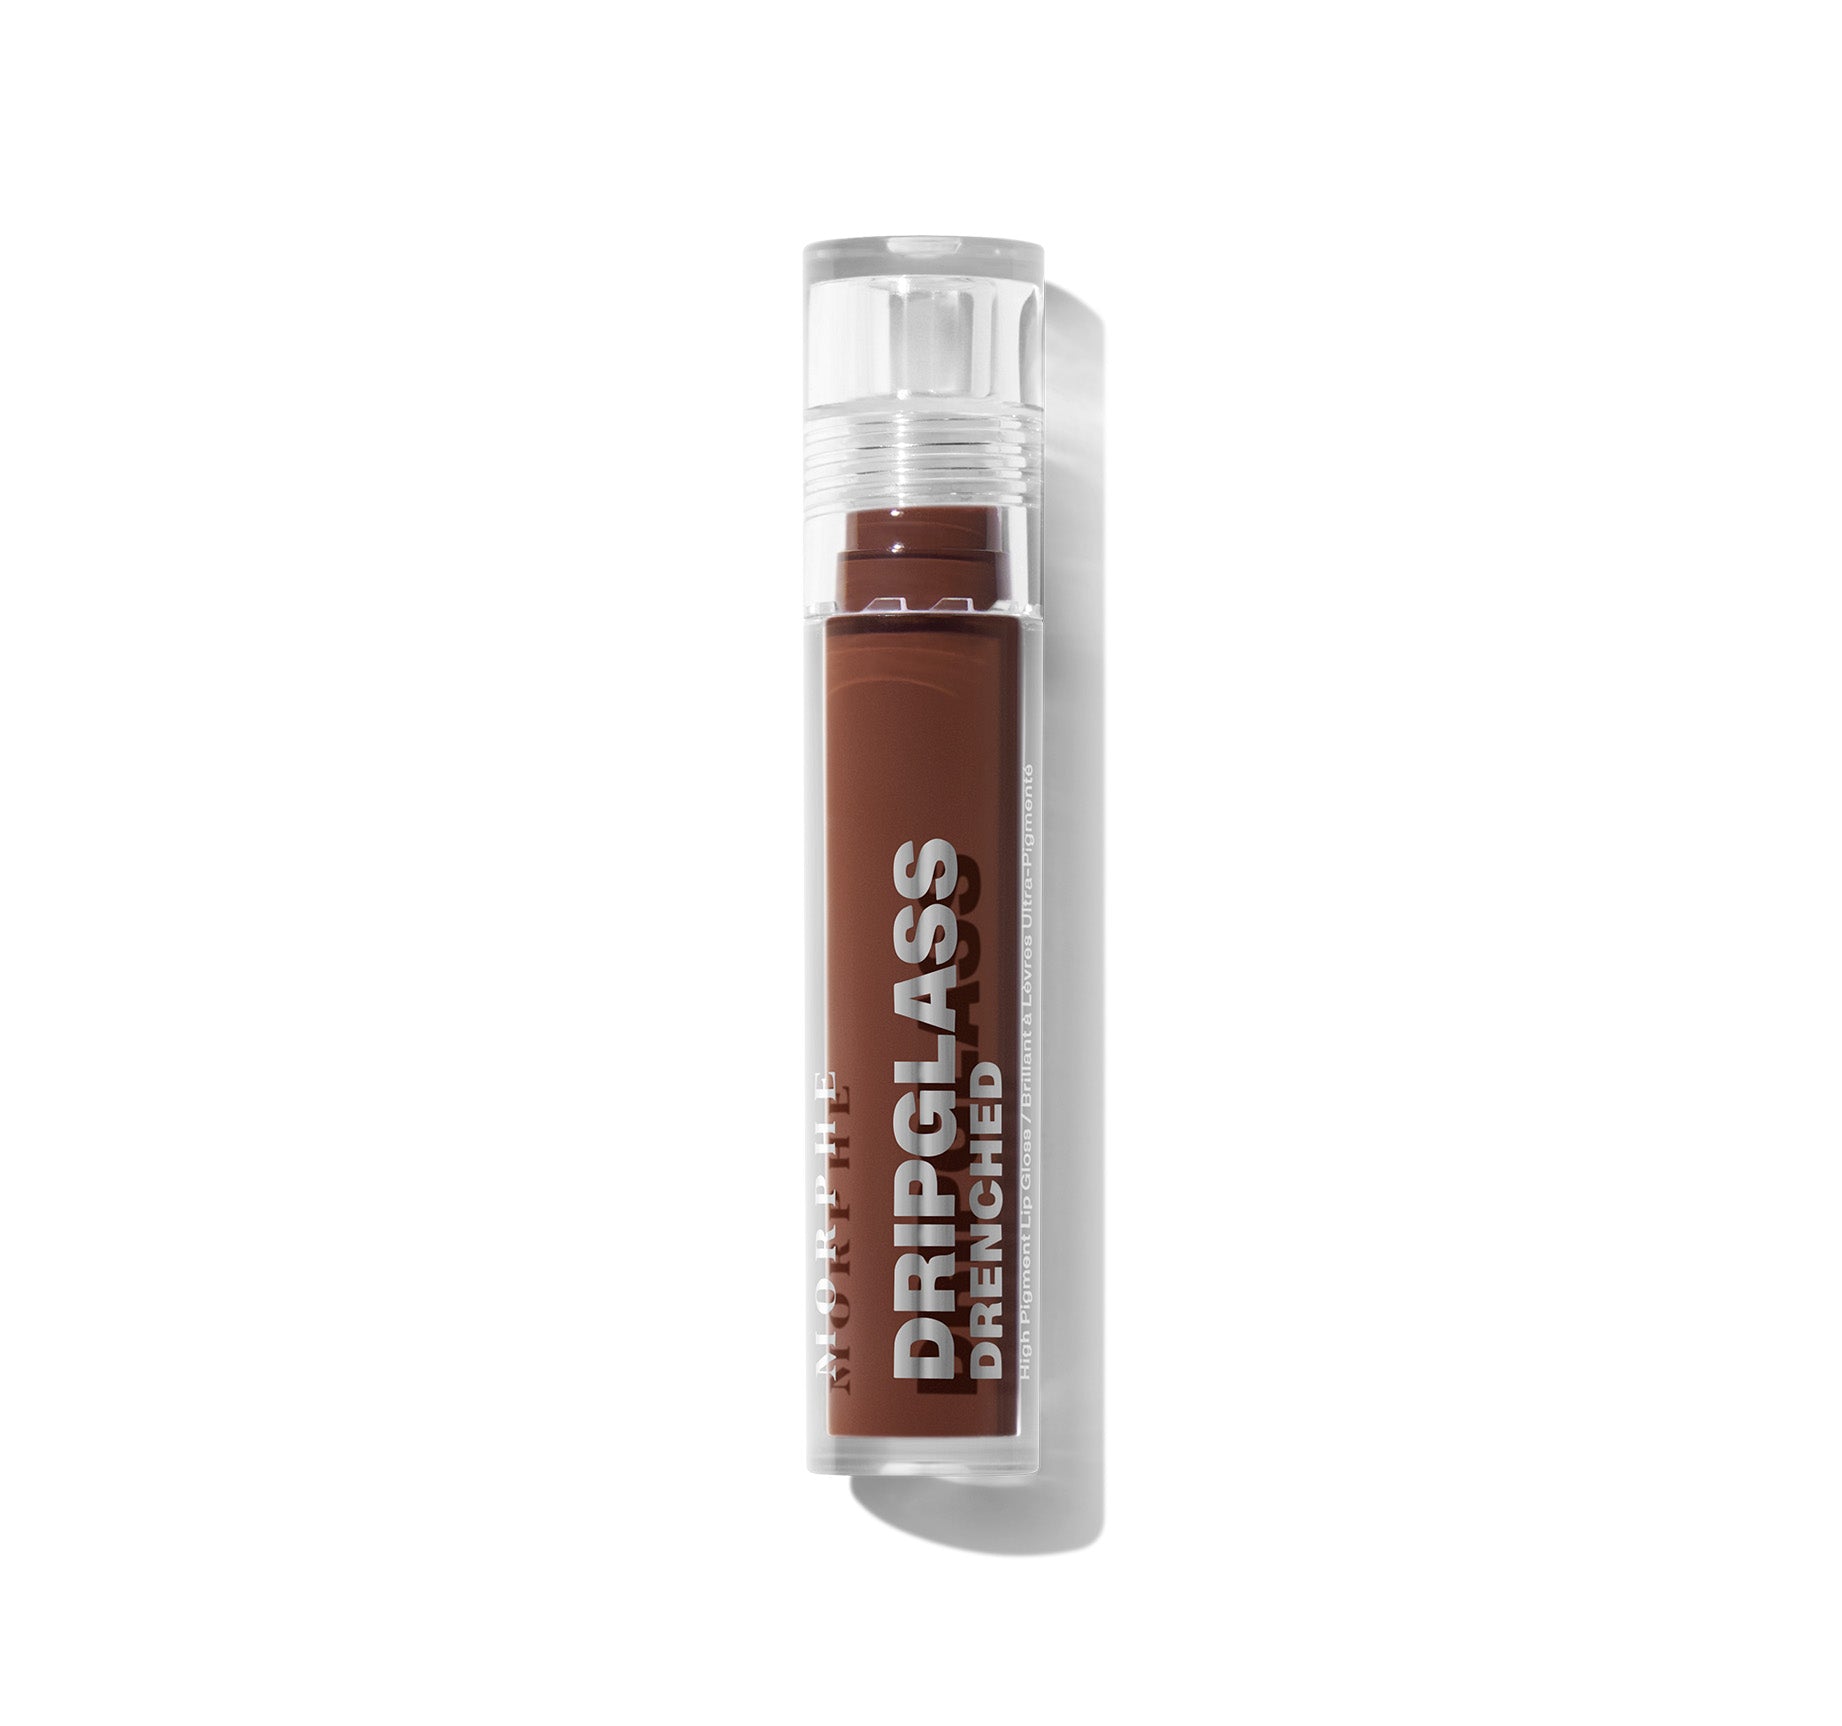 Dripglass Drenched High Pigment Lip Gloss - Cocoa Melt - Image 10